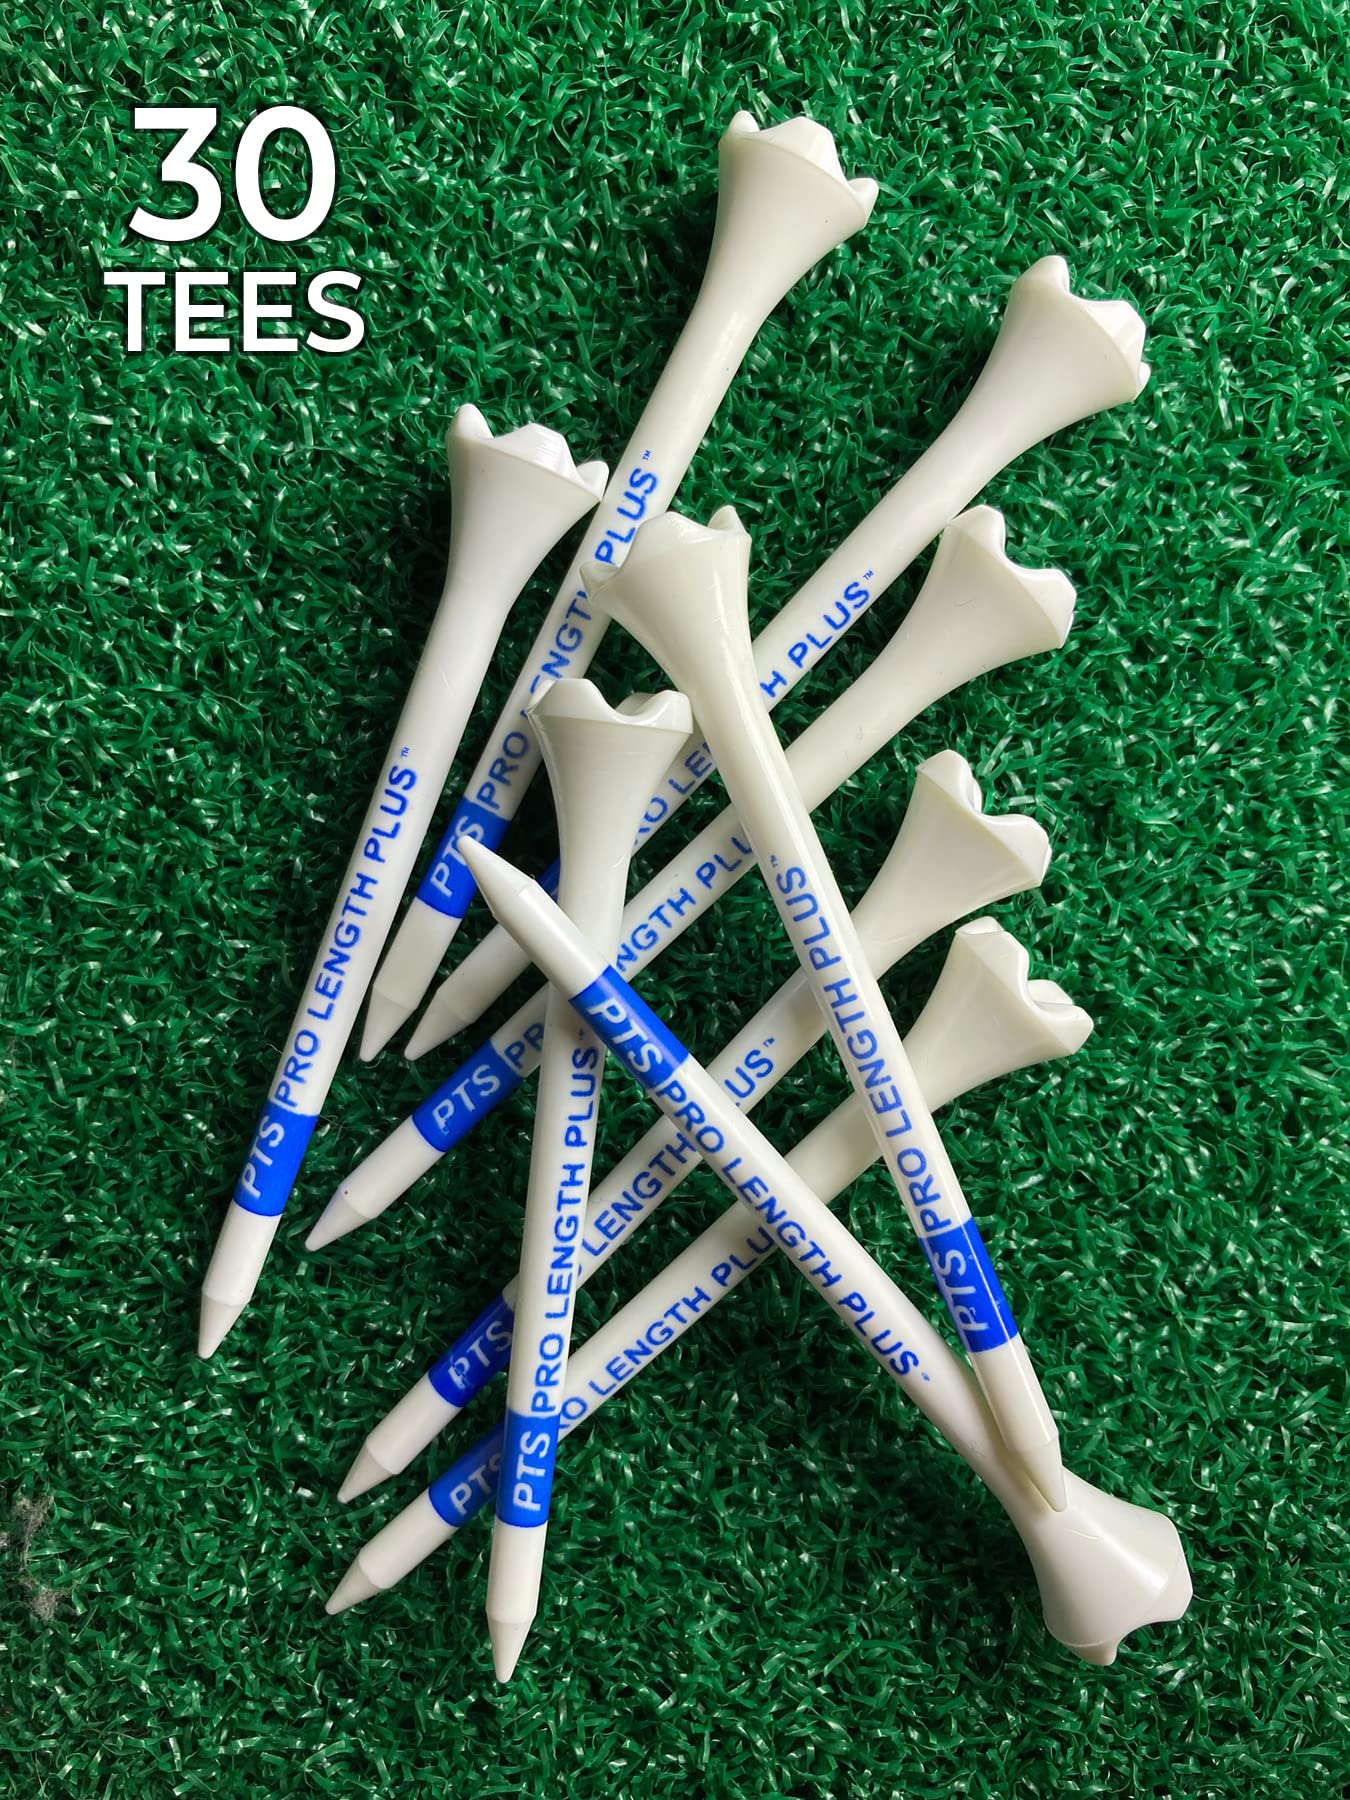 Pride Professional Tee System Plastic Golf Tees, 3-1/4 inch - 30 count (Blue),EV31430 White